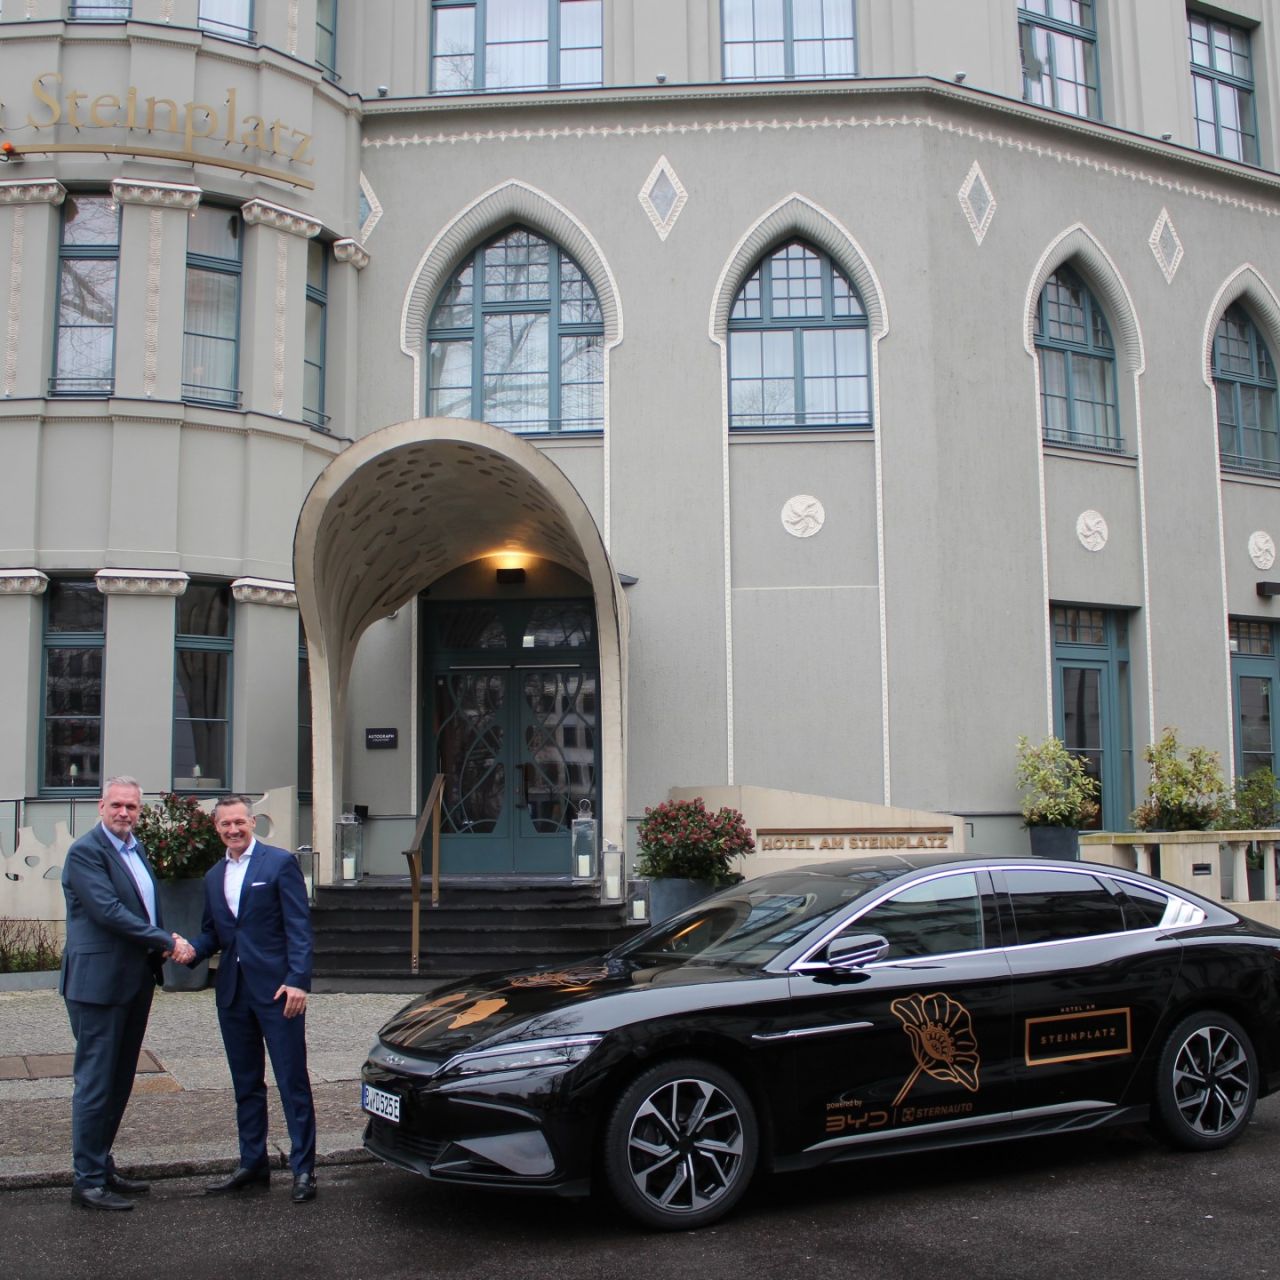 STERNAUTO Group partners with Hotel am Steinplatz, Autograph Collection in Berlin.